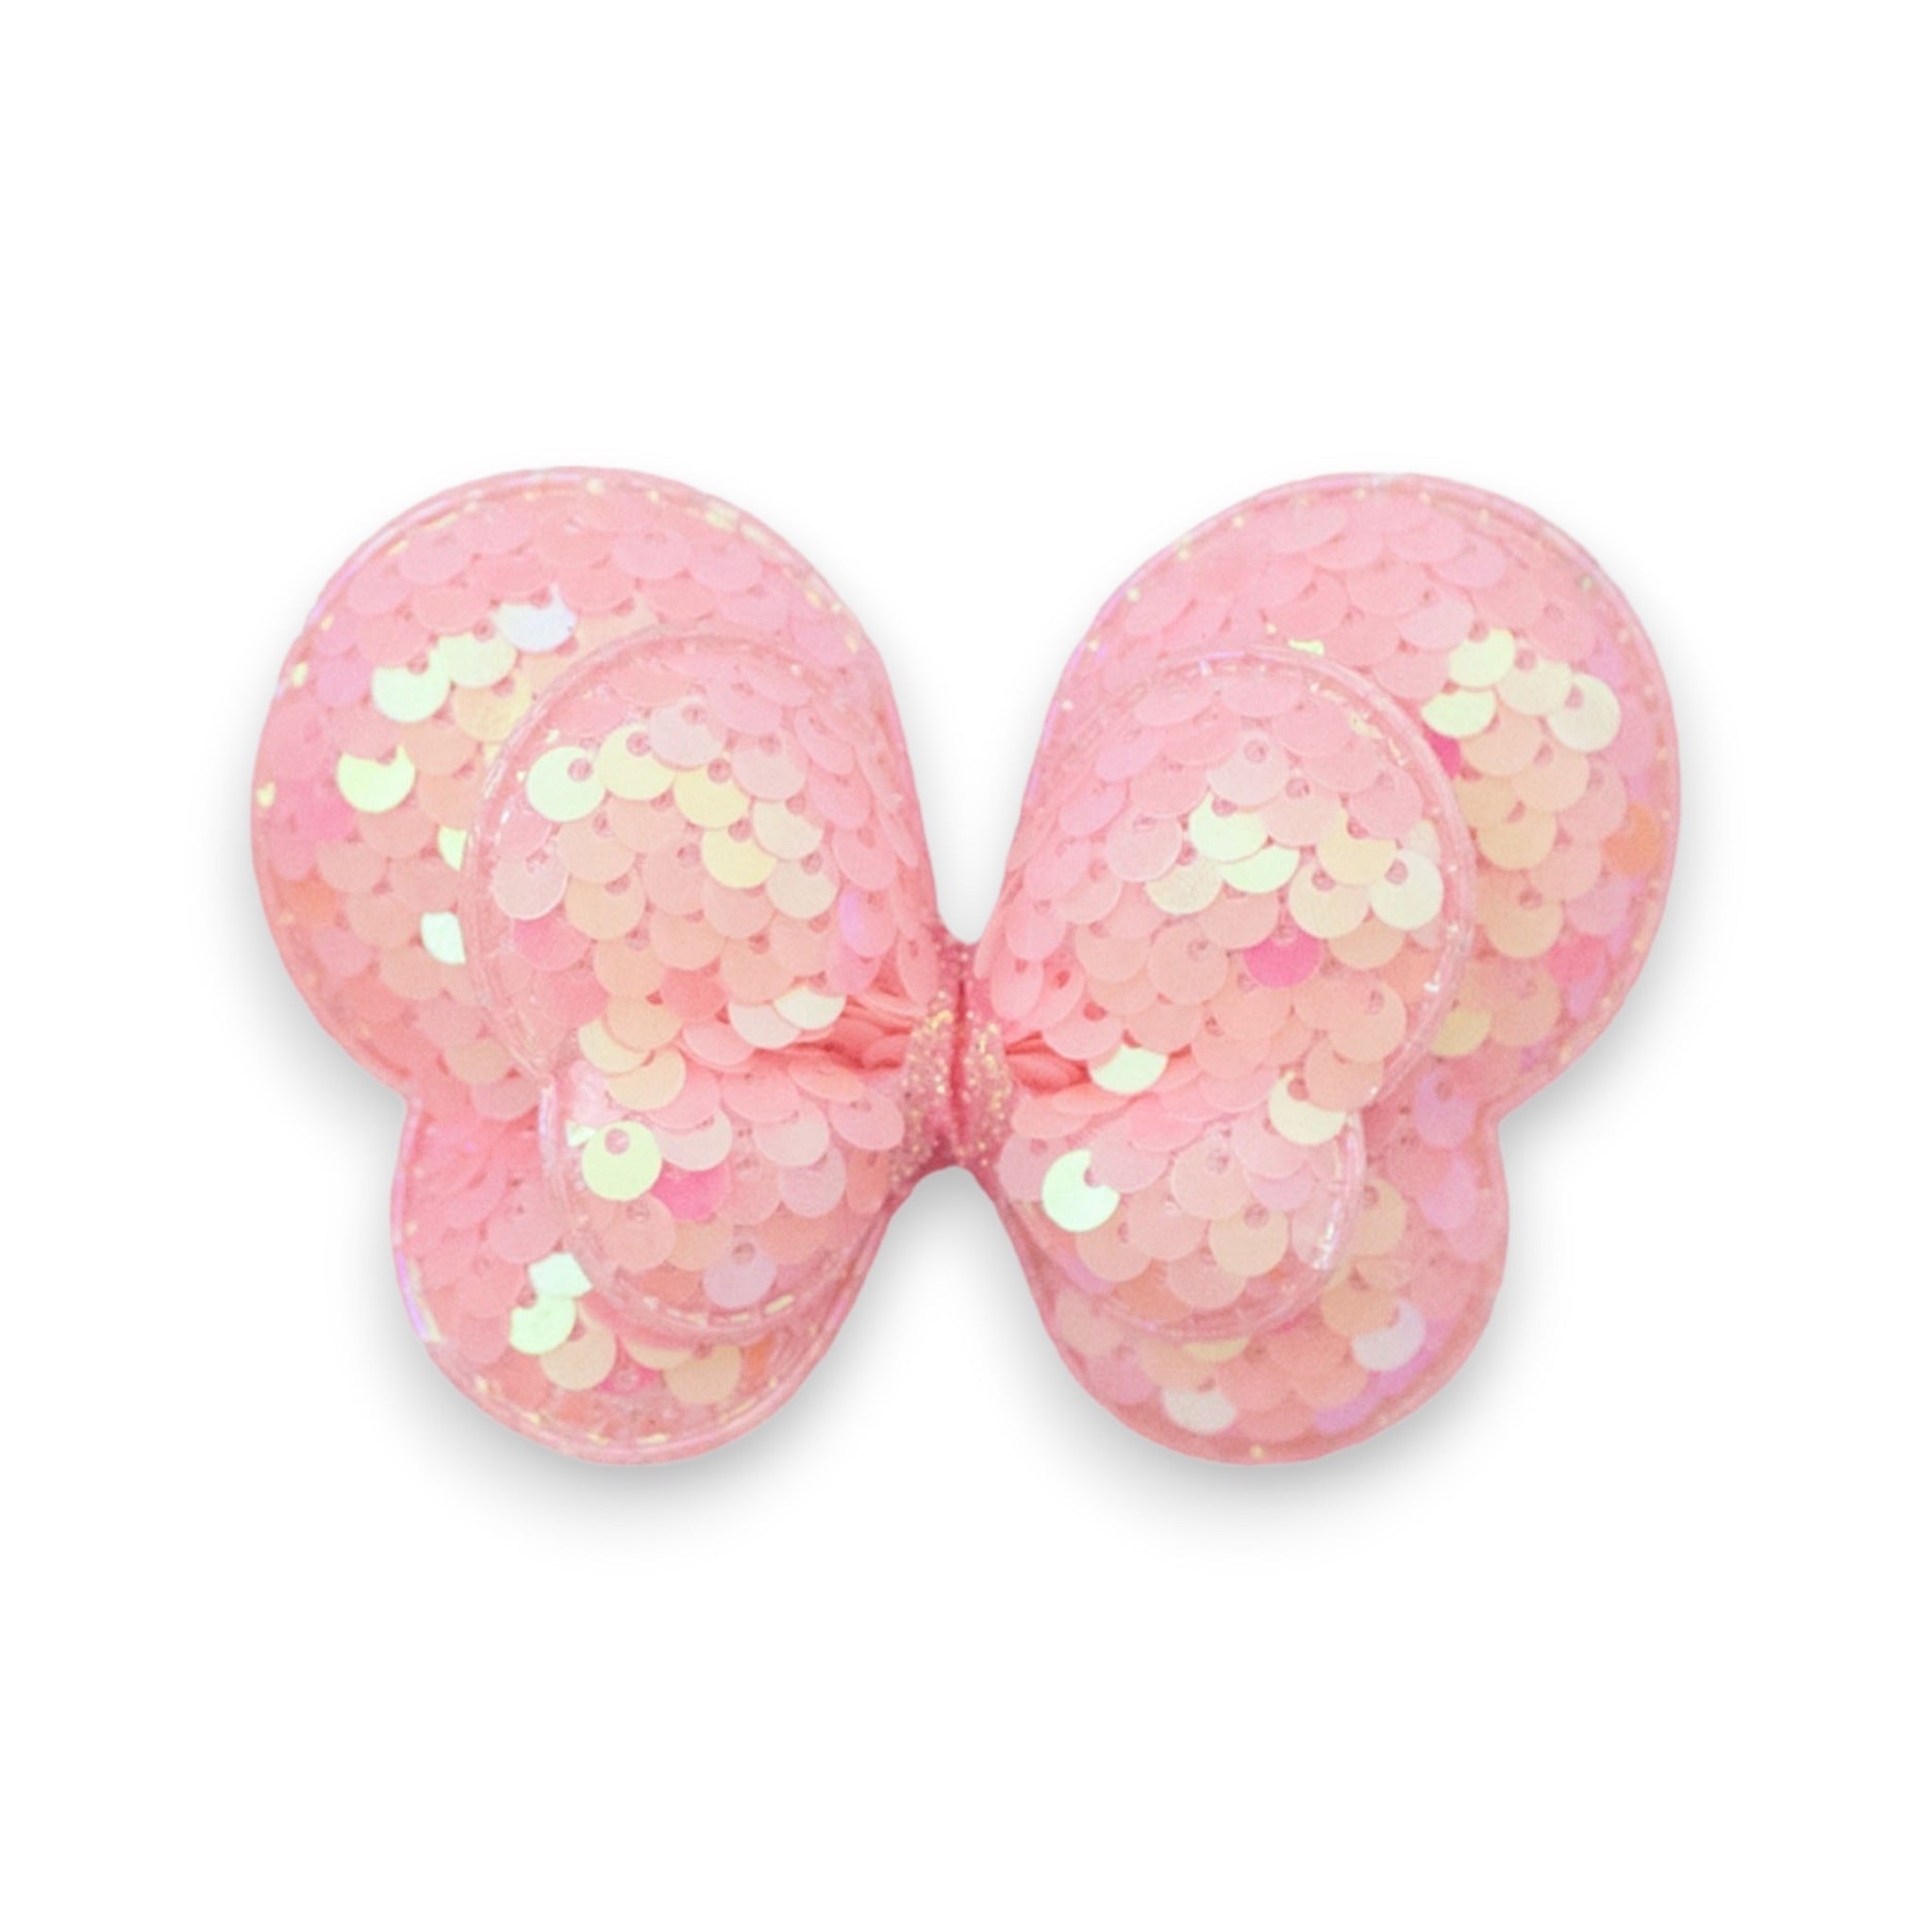 Summer Crystal Sparkling Sequins 3D Butterfly Bow Hair Clip